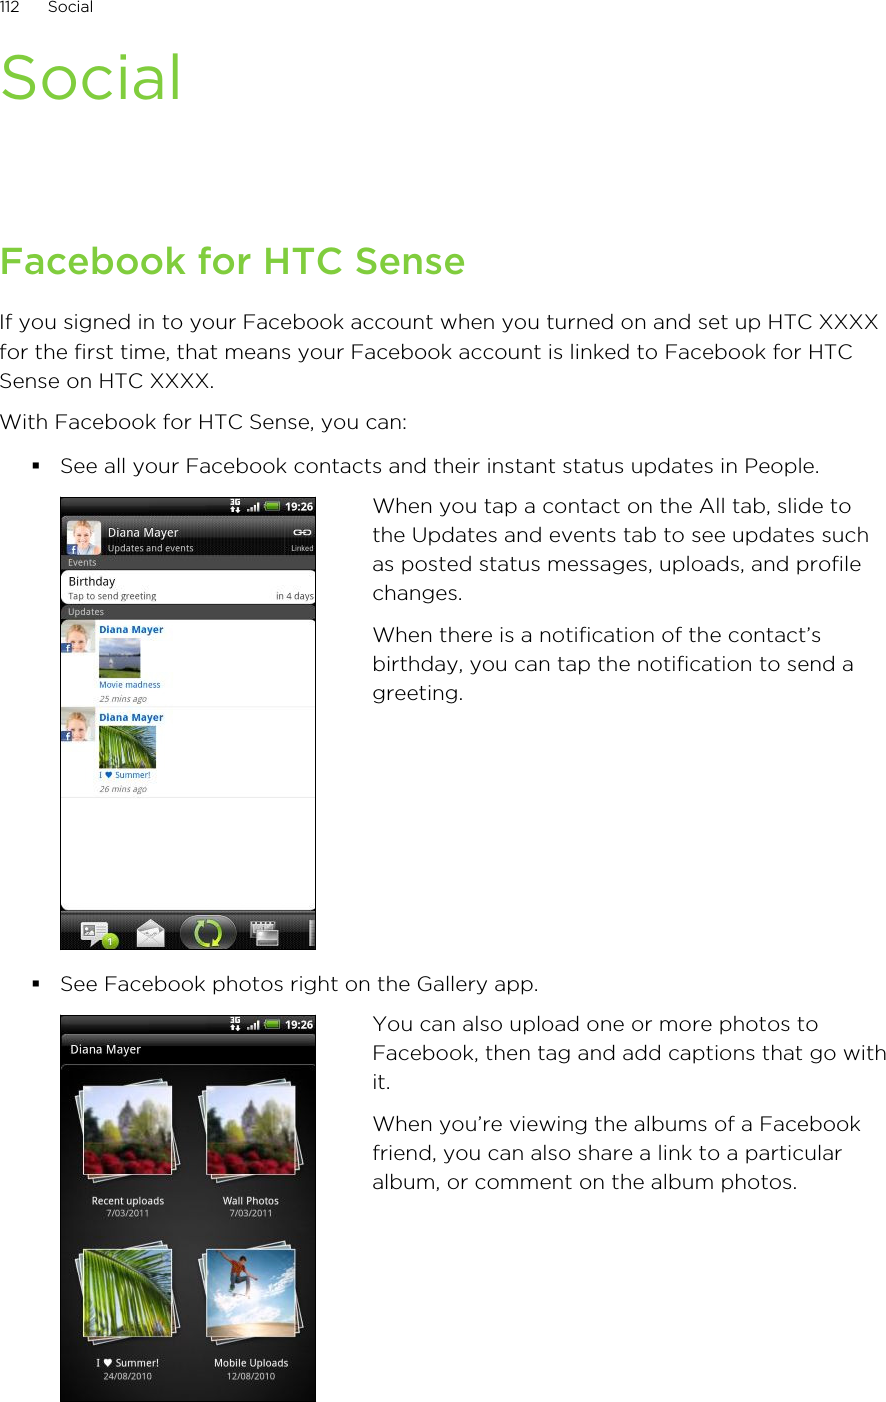 SocialFacebook for HTC SenseIf you signed in to your Facebook account when you turned on and set up HTC XXXXfor the first time, that means your Facebook account is linked to Facebook for HTCSense on HTC XXXX.With Facebook for HTC Sense, you can:§See all your Facebook contacts and their instant status updates in People.When you tap a contact on the All tab, slide tothe Updates and events tab to see updates suchas posted status messages, uploads, and profilechanges.When there is a notification of the contact’sbirthday, you can tap the notification to send agreeting.§See Facebook photos right on the Gallery app.You can also upload one or more photos toFacebook, then tag and add captions that go withit.When you’re viewing the albums of a Facebookfriend, you can also share a link to a particularalbum, or comment on the album photos.112 Social